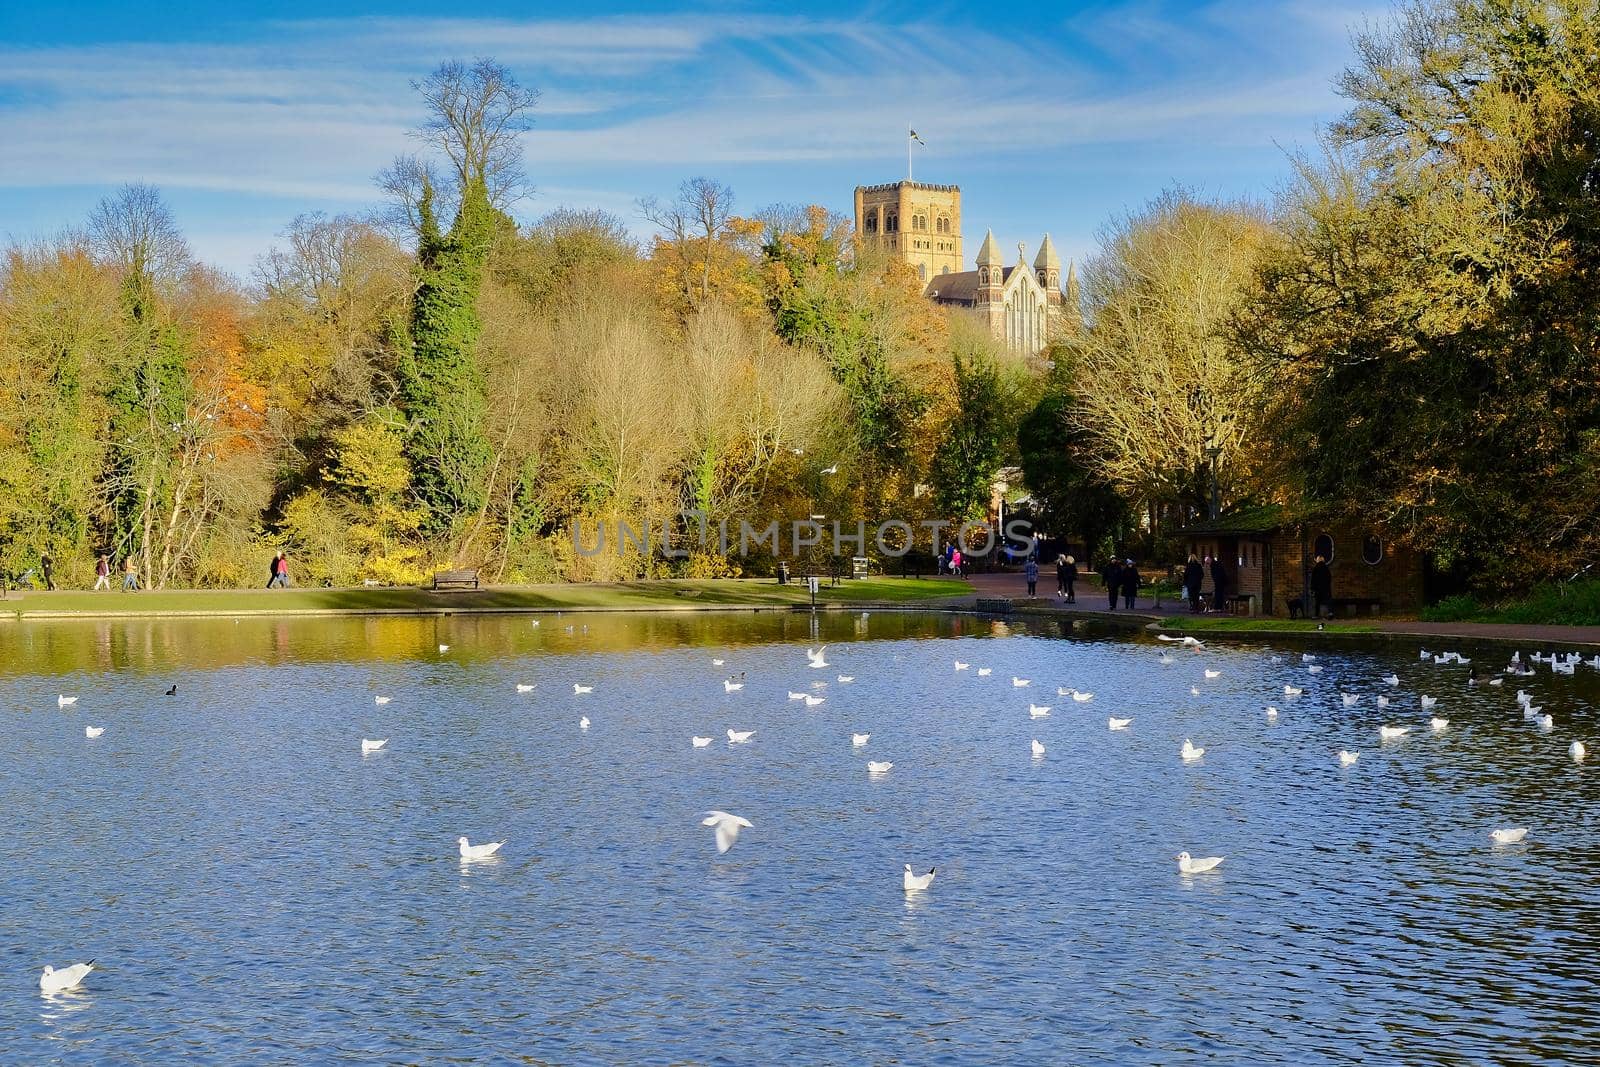 View of the ornamental lake in Verulanium Park, St Albans,UK. with the Cathedral in the background.